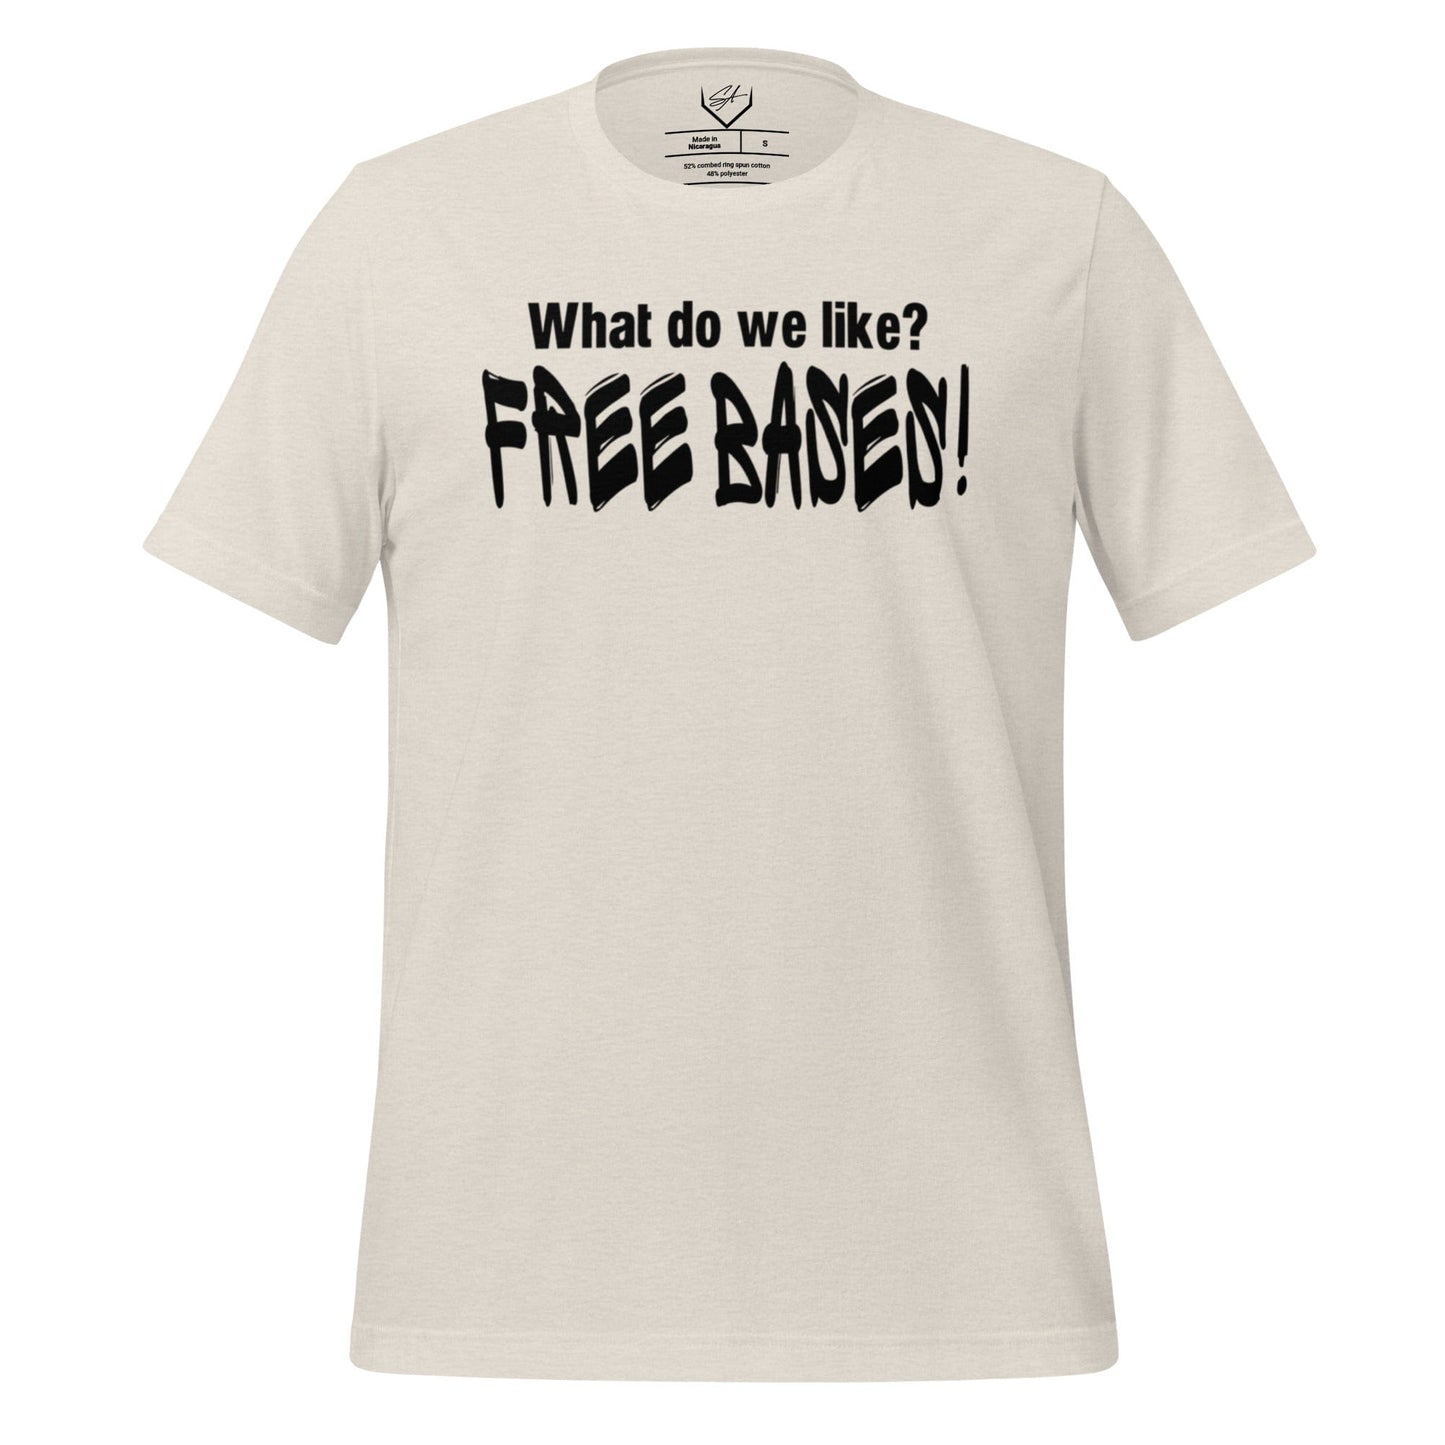 What Do We Like, Free Bases - Adult Tee